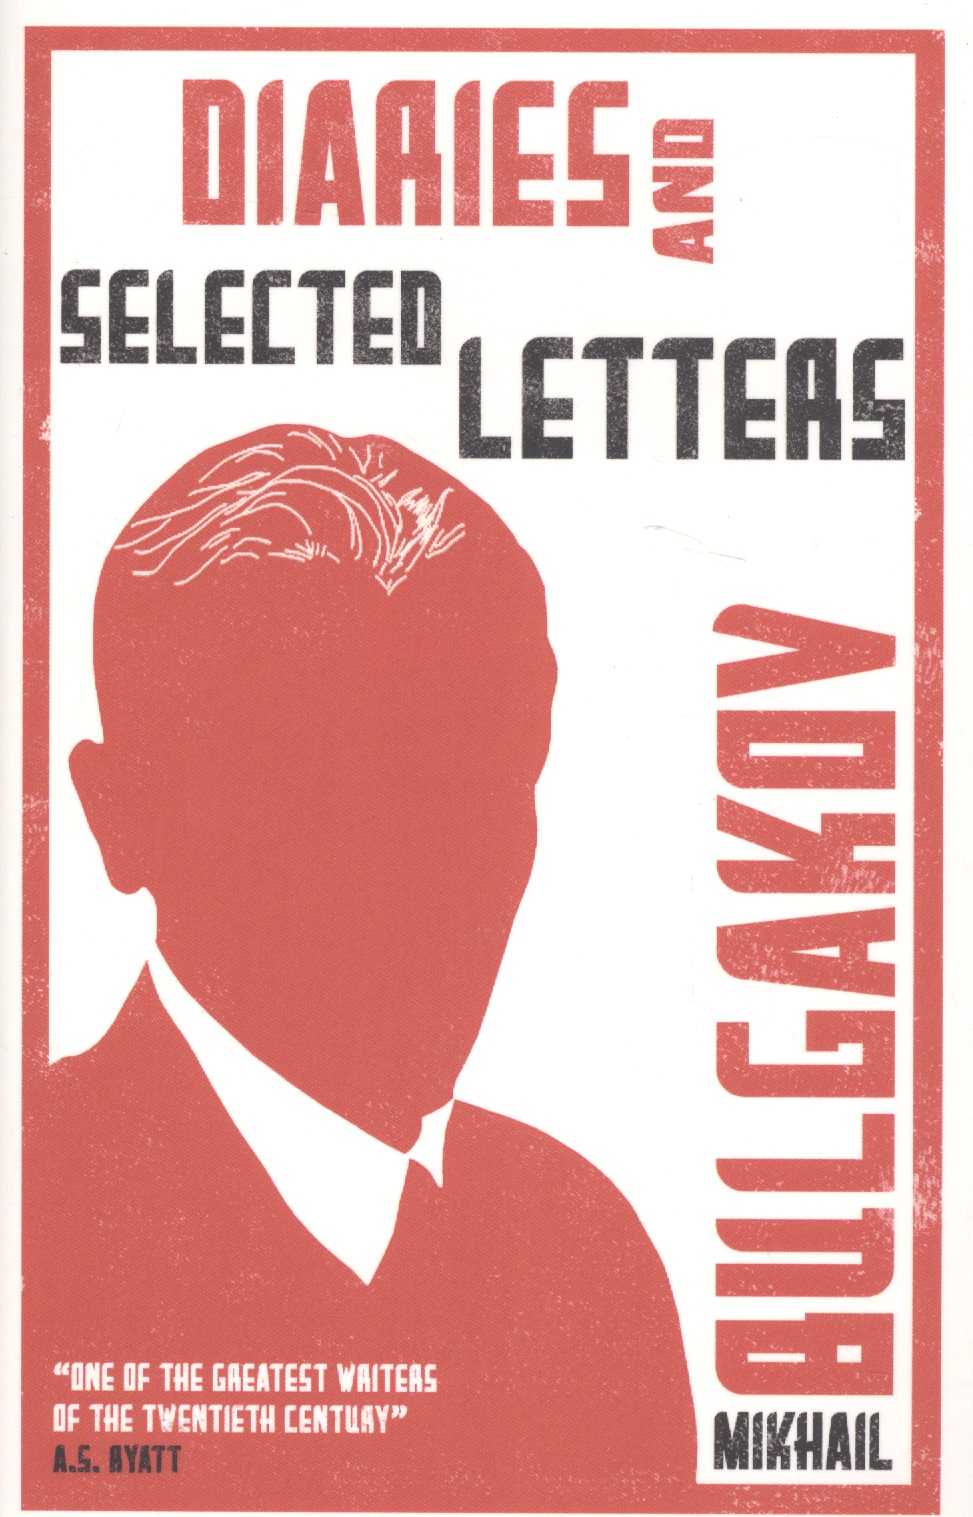 Diaries and Selected Letters (м) Bulgakov bulgakov mikhail diaries and selected letters